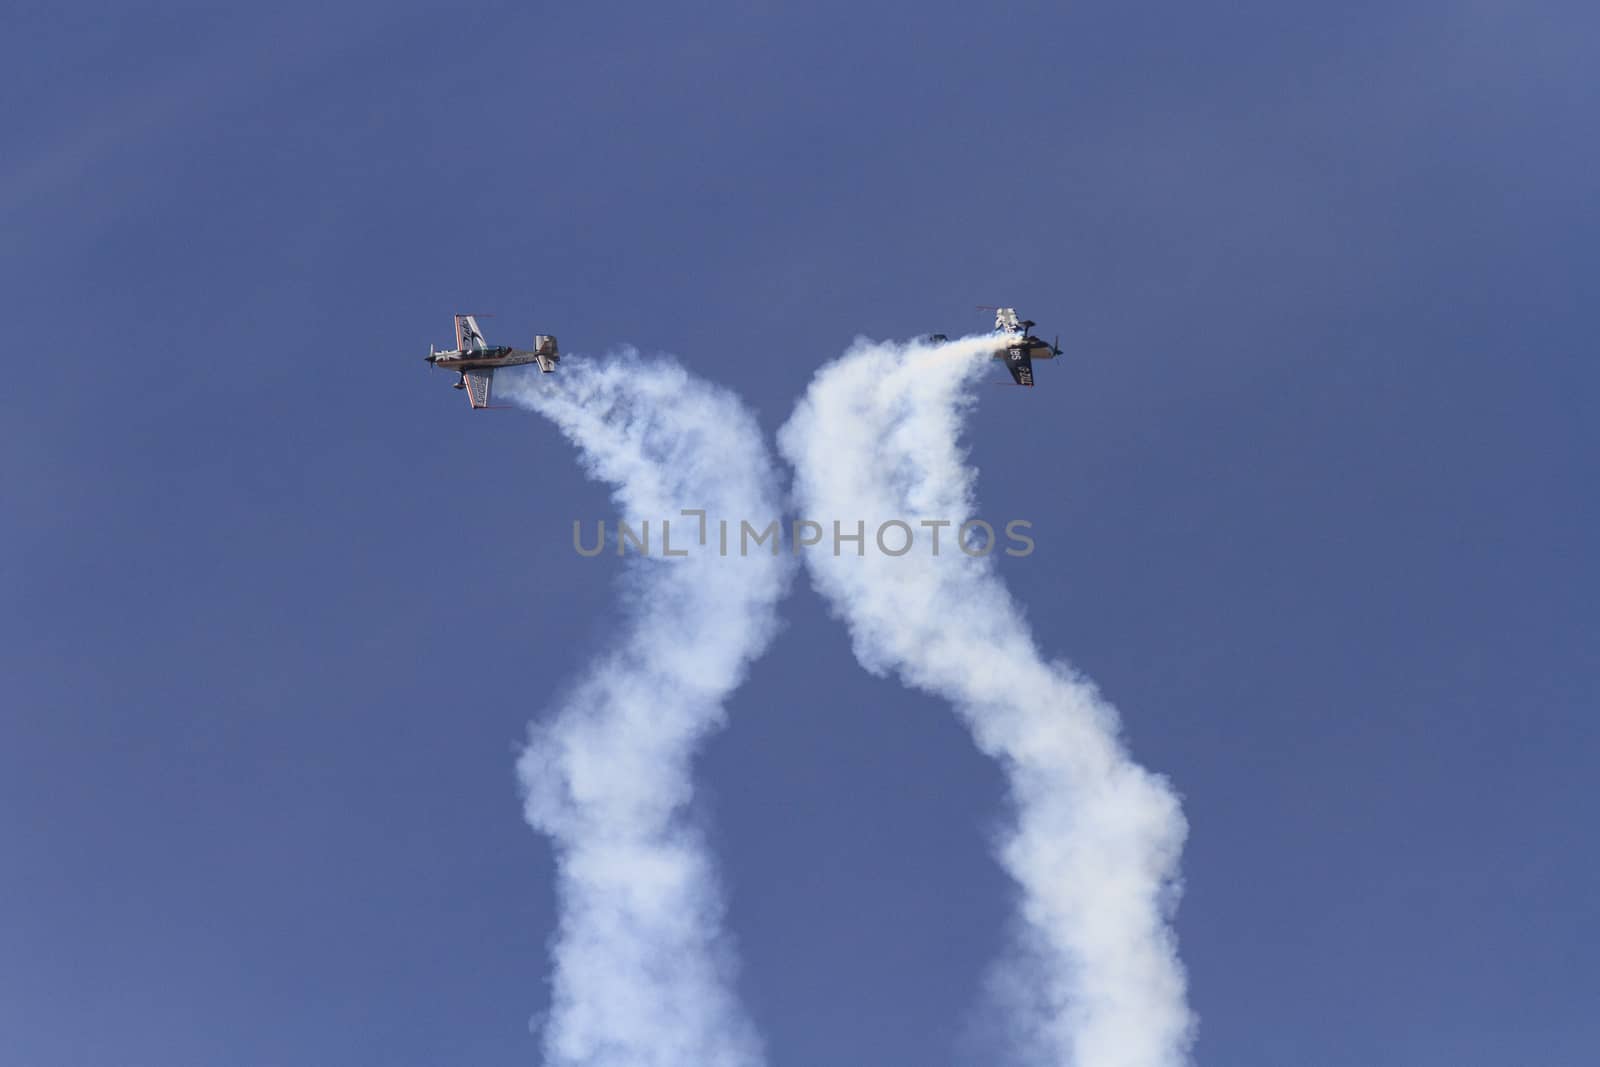 ENGLAND, Southport: Two planes leaves spiral smoke trails during the Southport Airshow 2015 in Southport, Merseyside in England on September 19, 2015